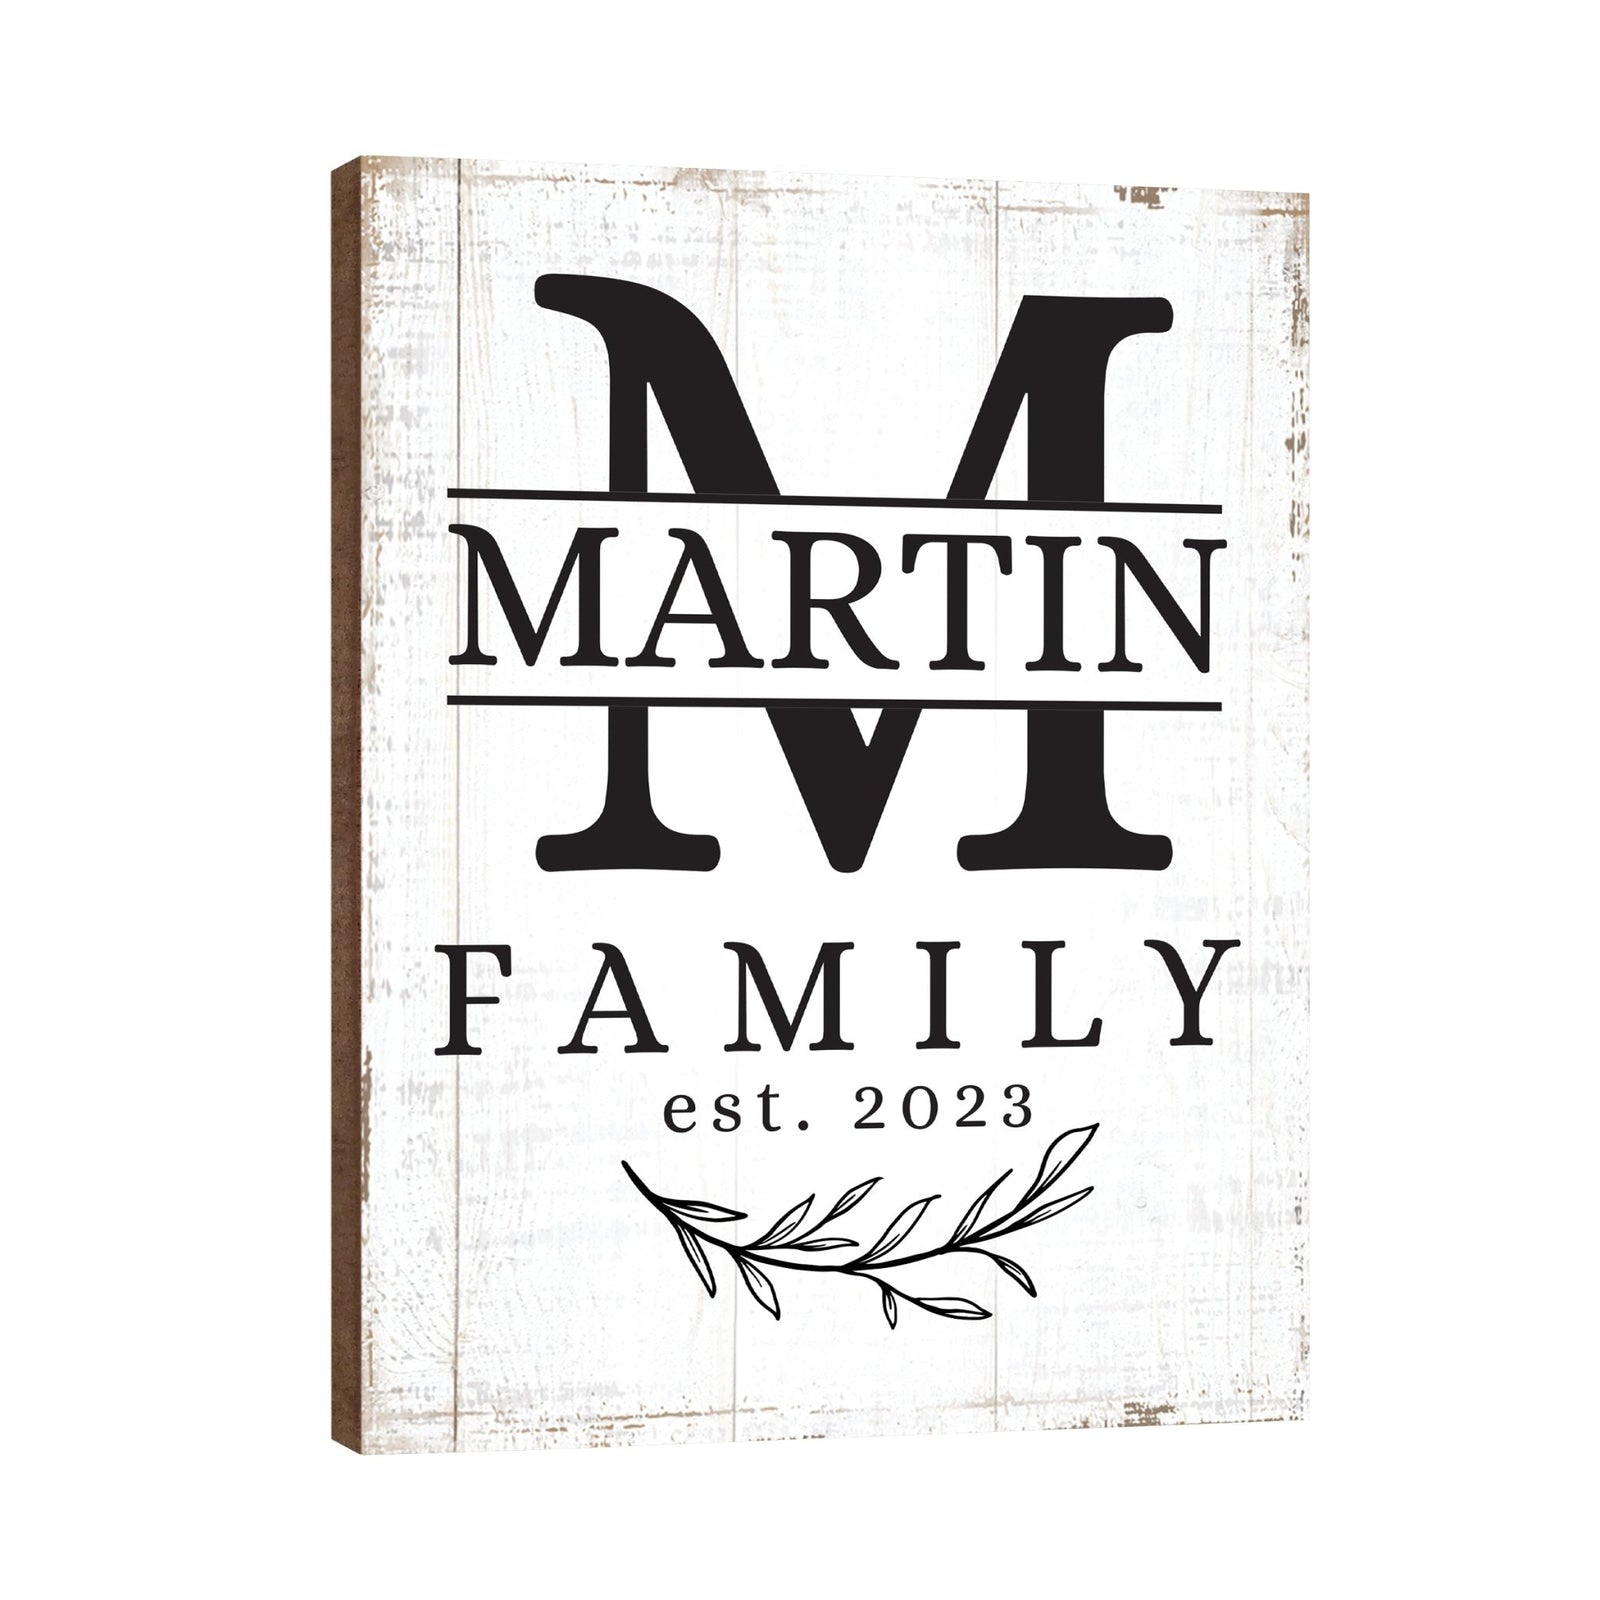 Personalized Family Wall Hanging Plaque for Home Décor - Martin Family - LifeSong Milestones